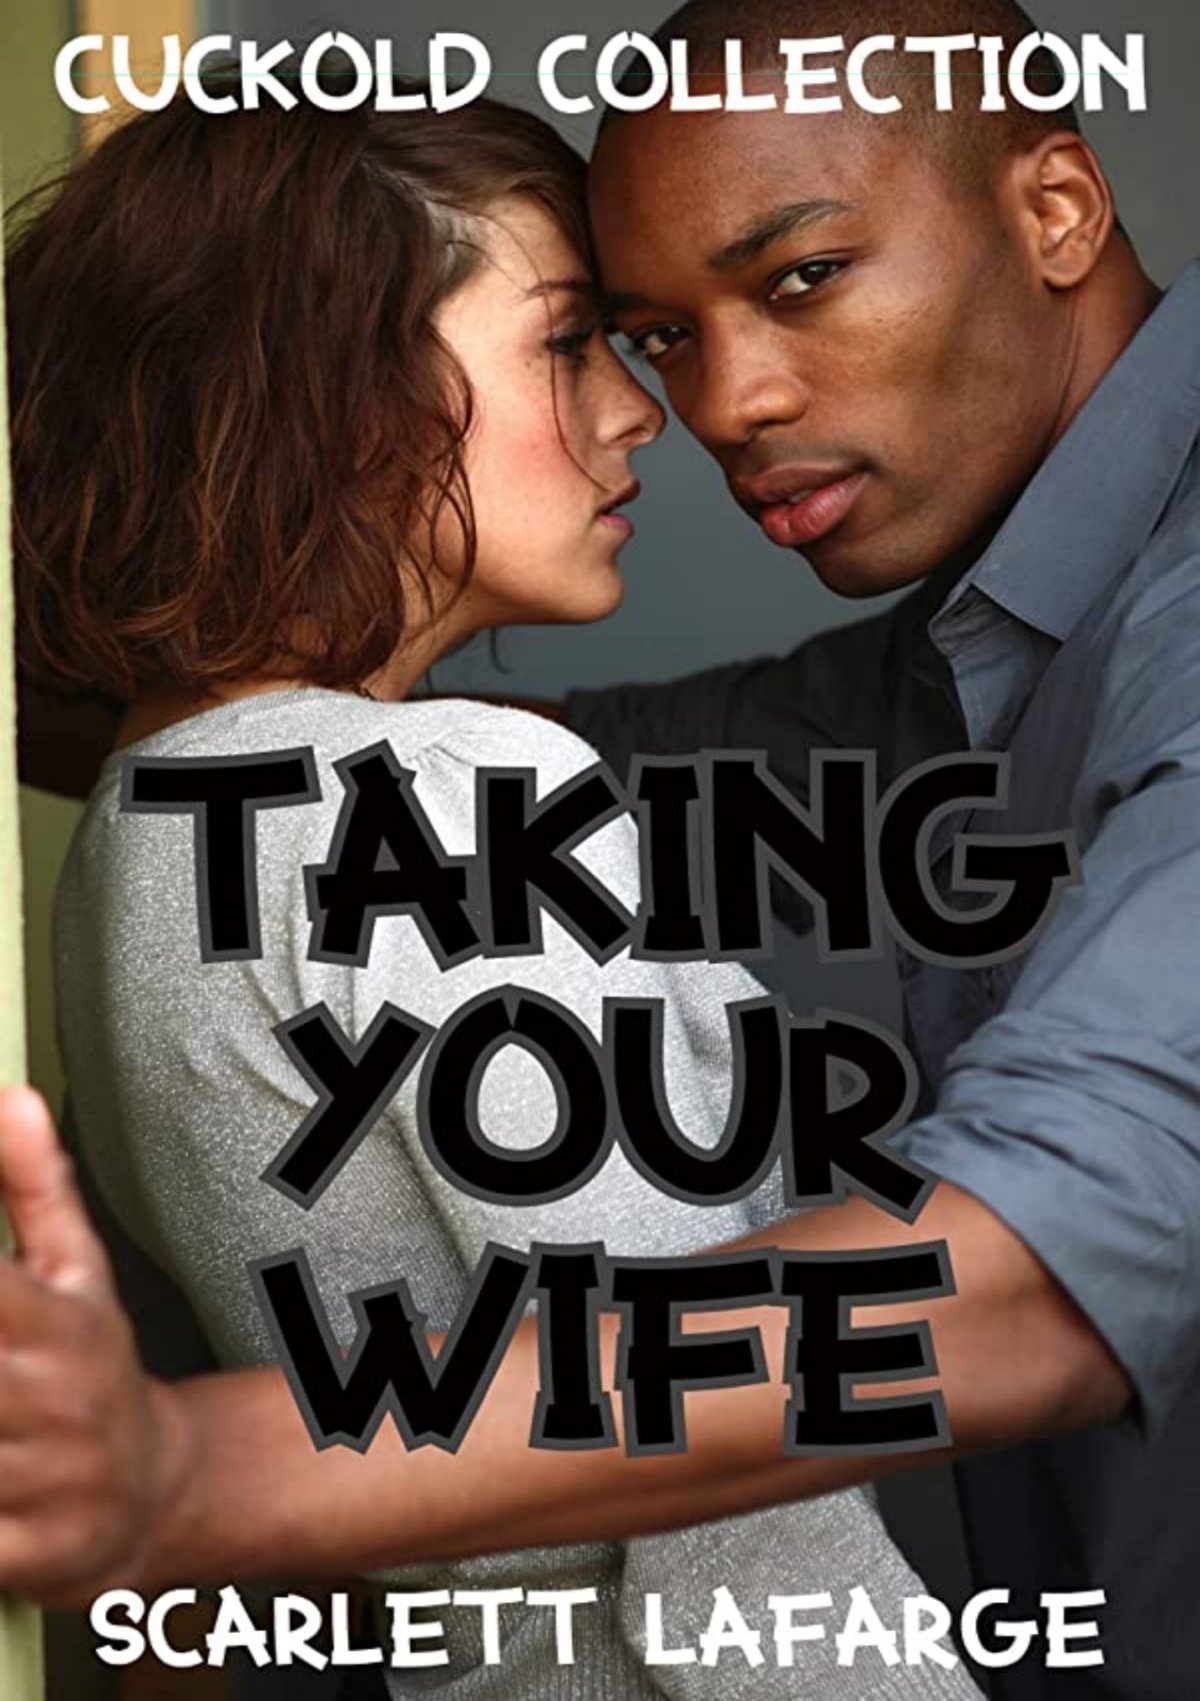 Taking Your Wife Cuckold Collection